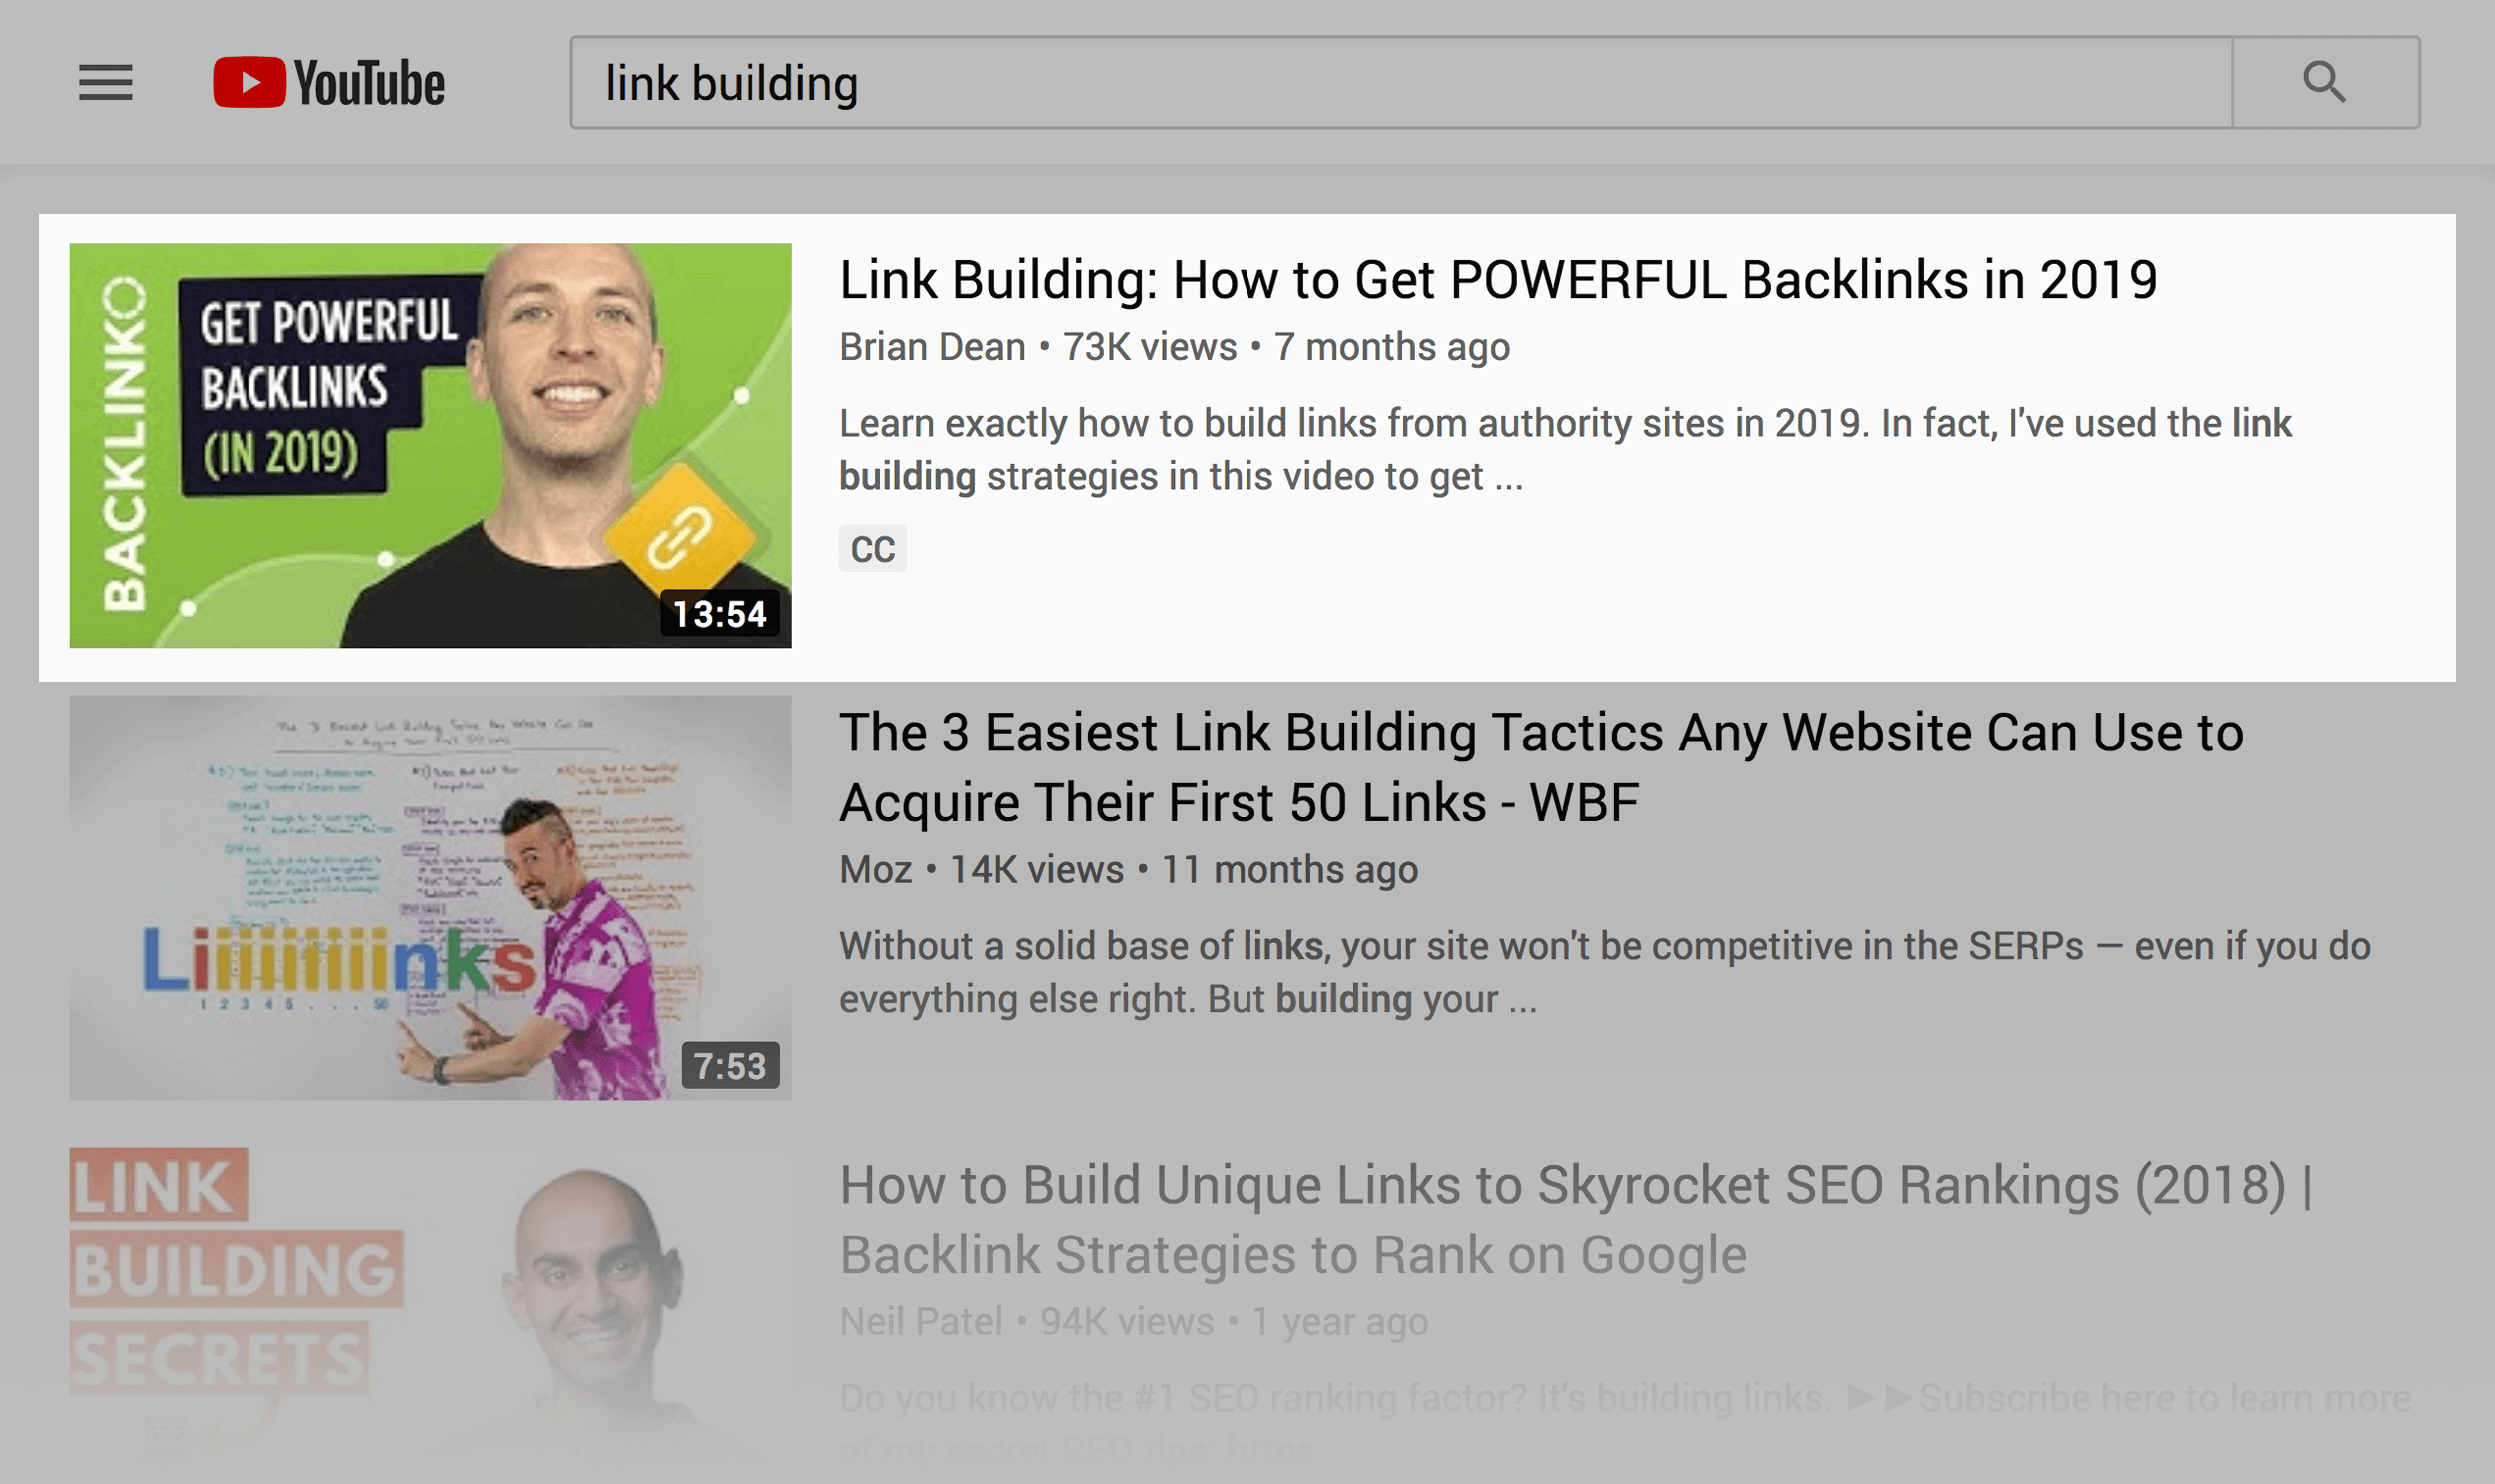 YouTube SERPs – Backlinko ranking for "link building"